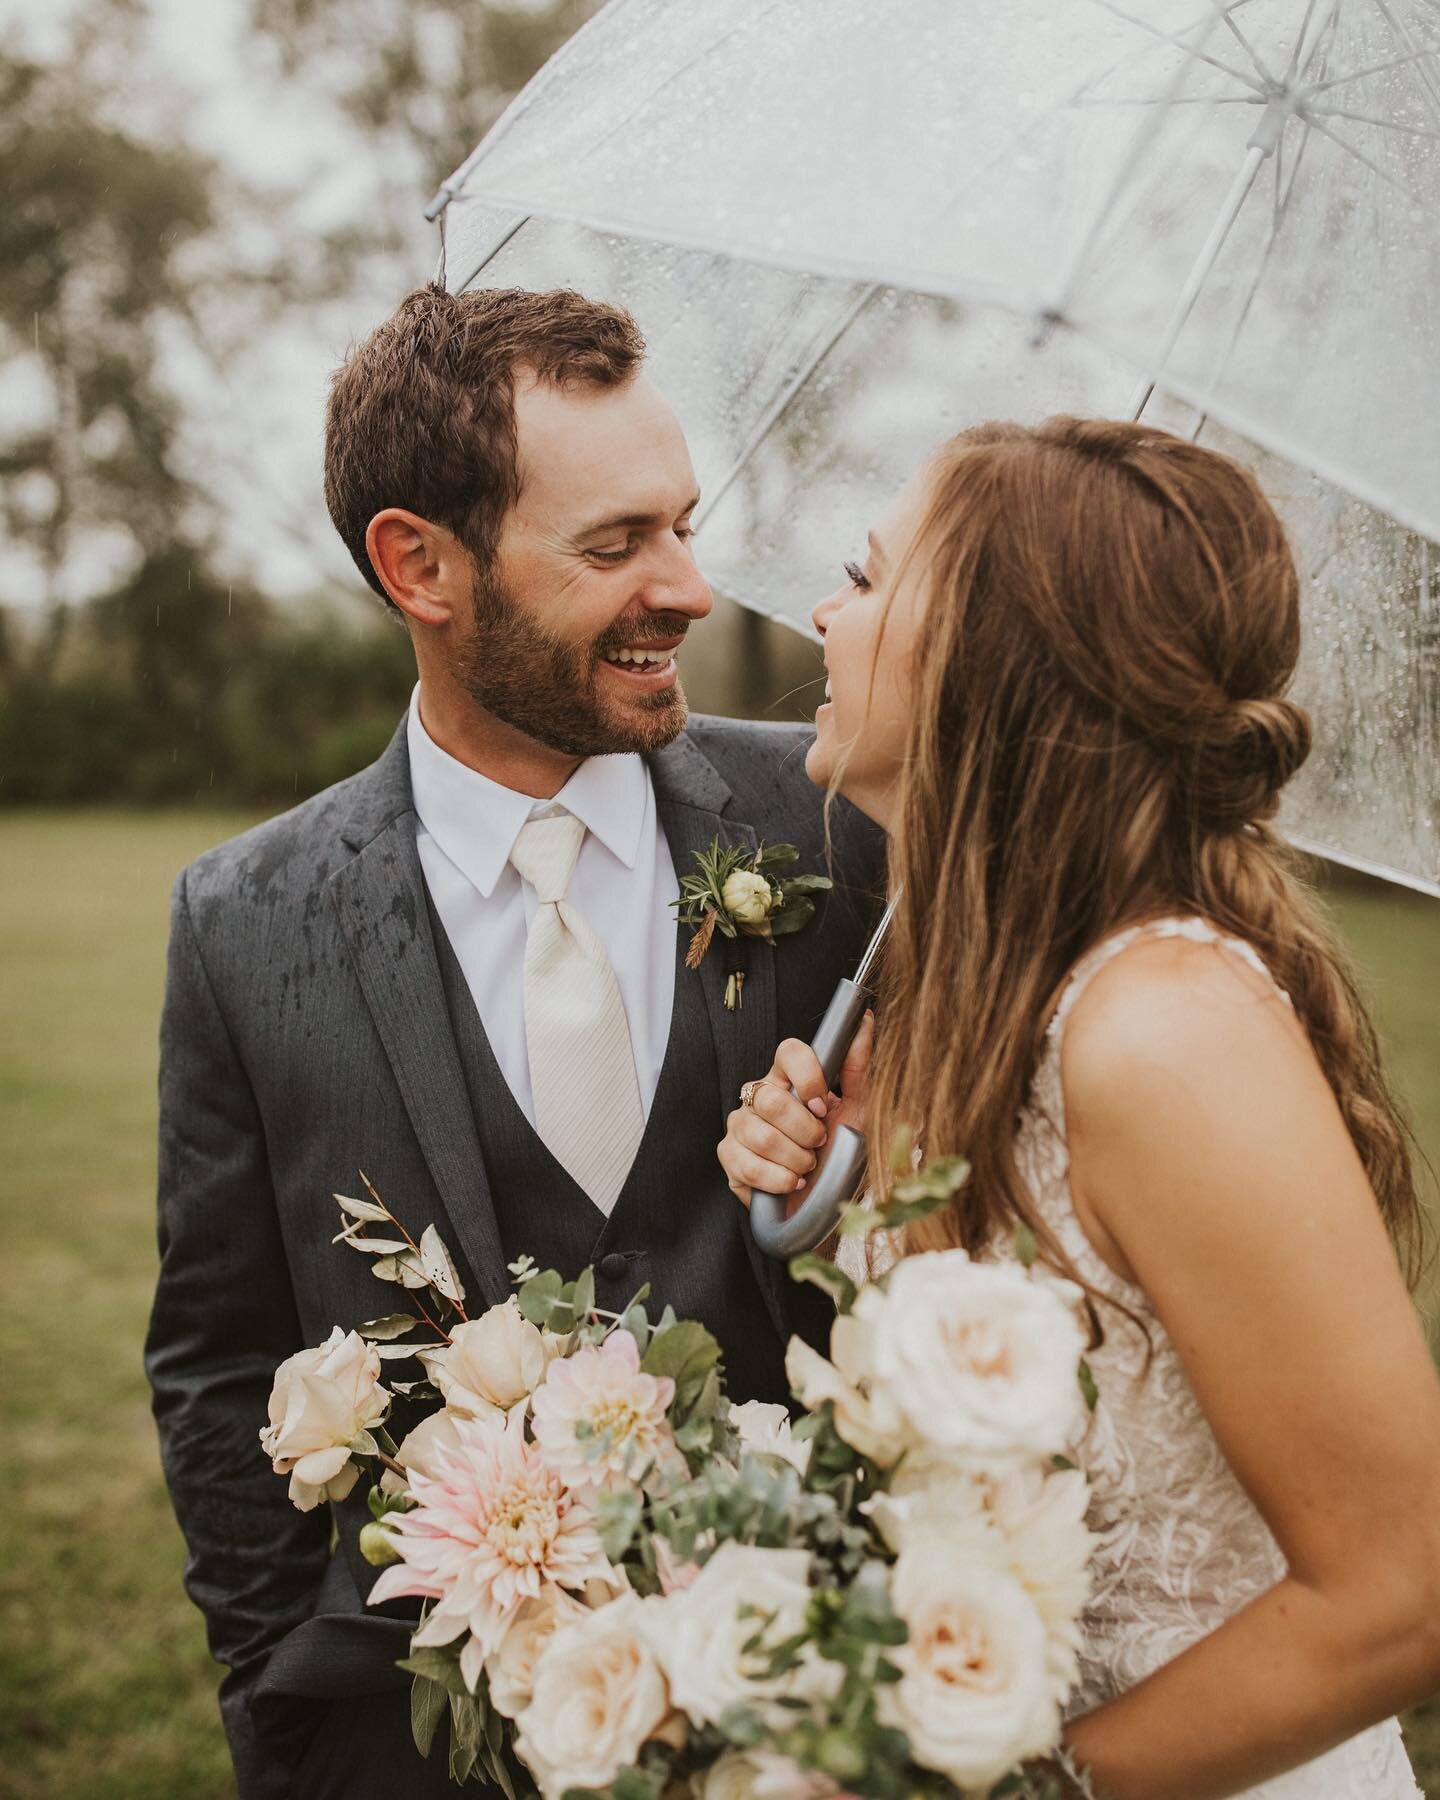 Sometimes when it&rsquo;s pouring rain on your wedding day ya just gotta get wet and embrace the rain!! That&rsquo;s exactly what these two did! Danielle + Alex had a little different day than originally planned, but everything turned out to be even 